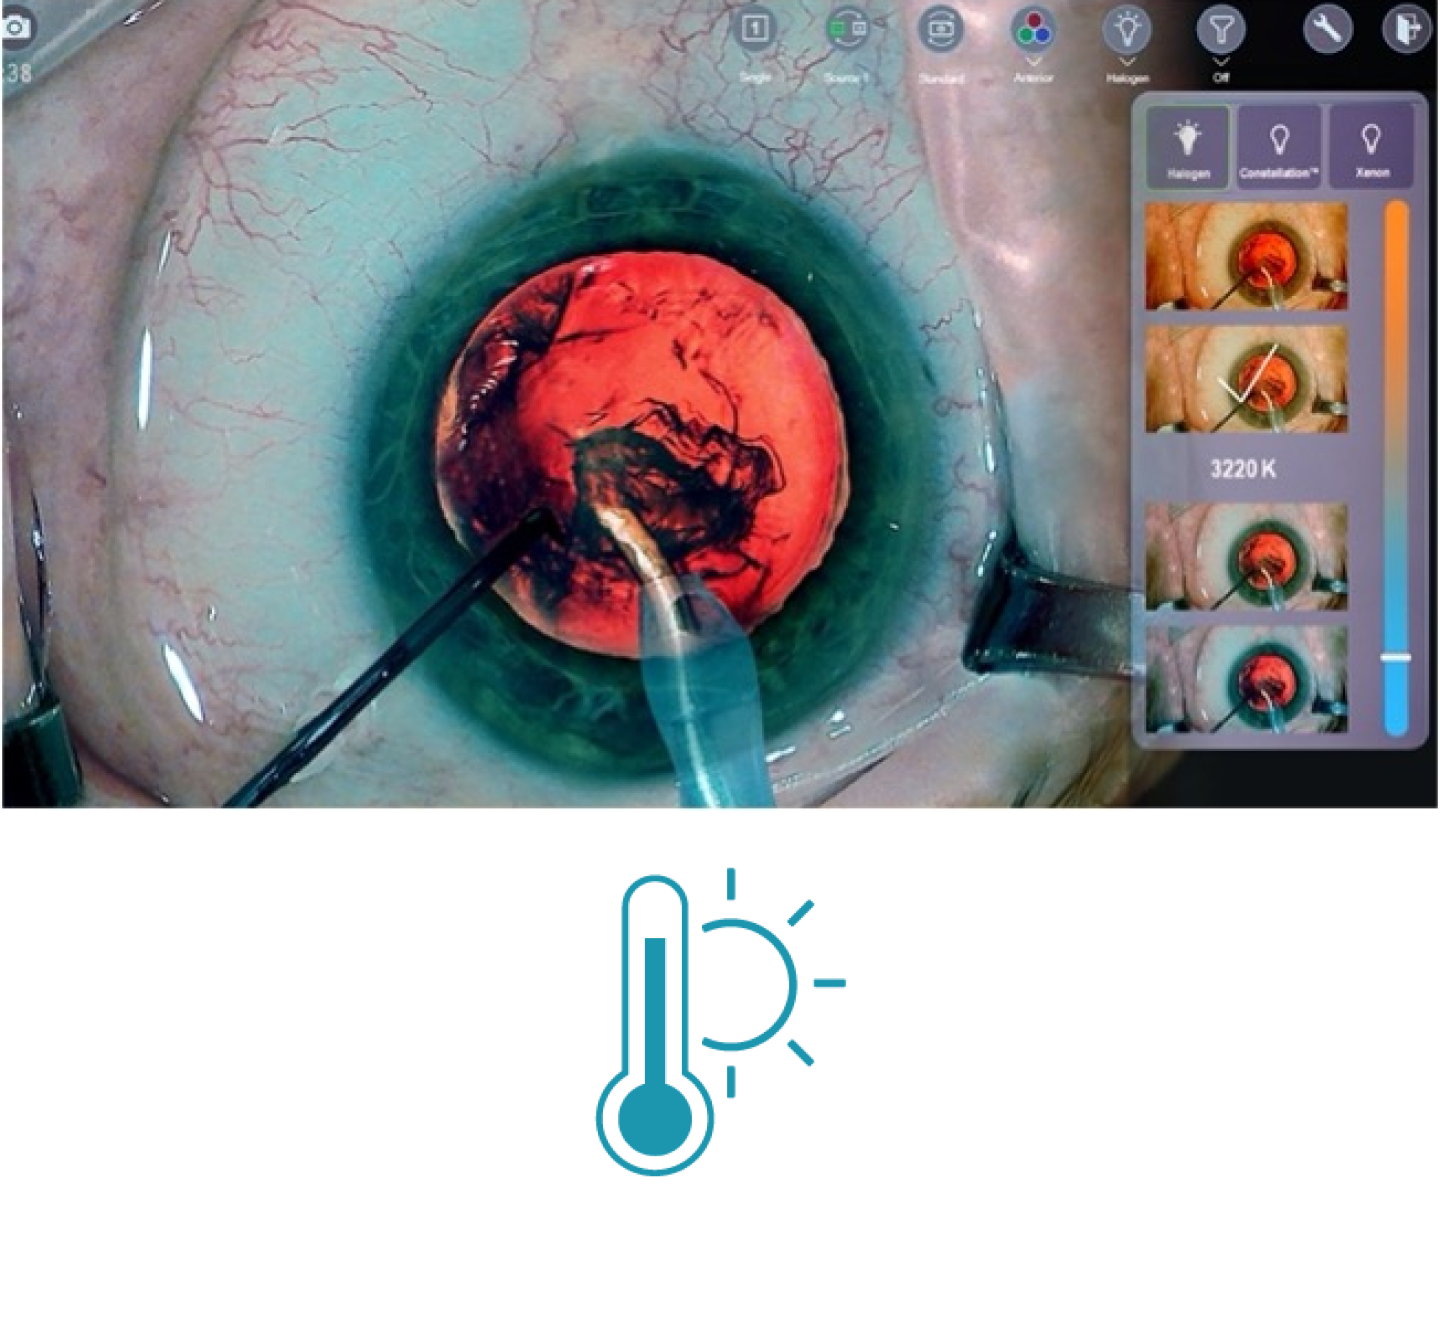 A closeup image of an eye during surgery with surgical tools on screen Thumbnails on the right side of the screen show the different light temperature filters available with NGENUITY 3D Visualization System.A blue icon showing a thermometer with the sun behind it 